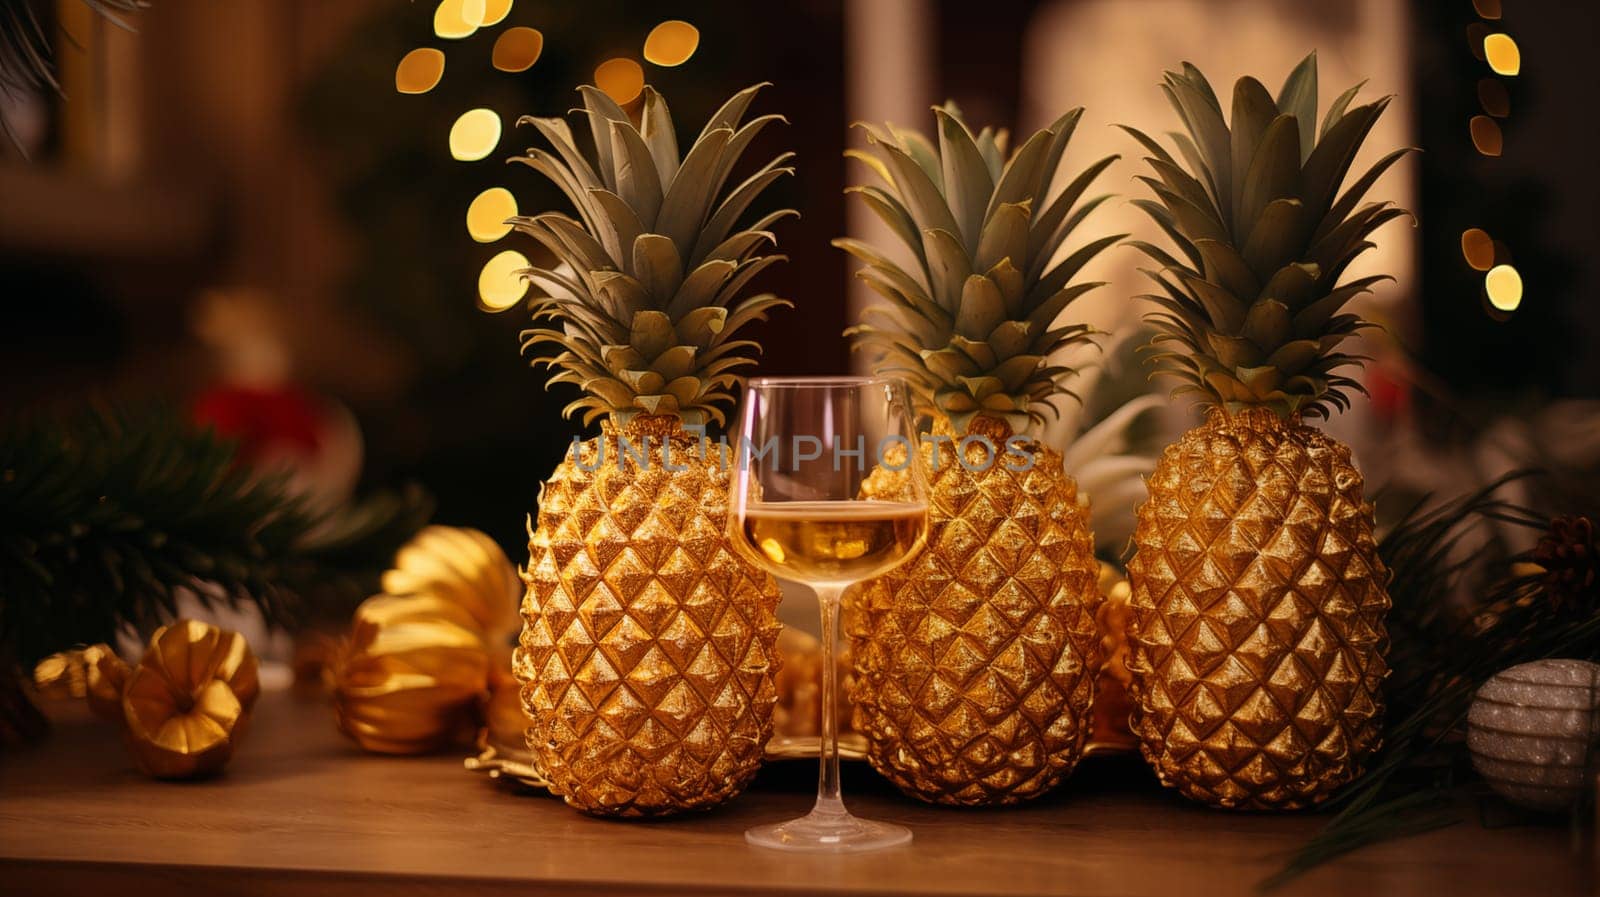 Three golden pineapples and glass of champagne, stand on plates on the table by Zakharova